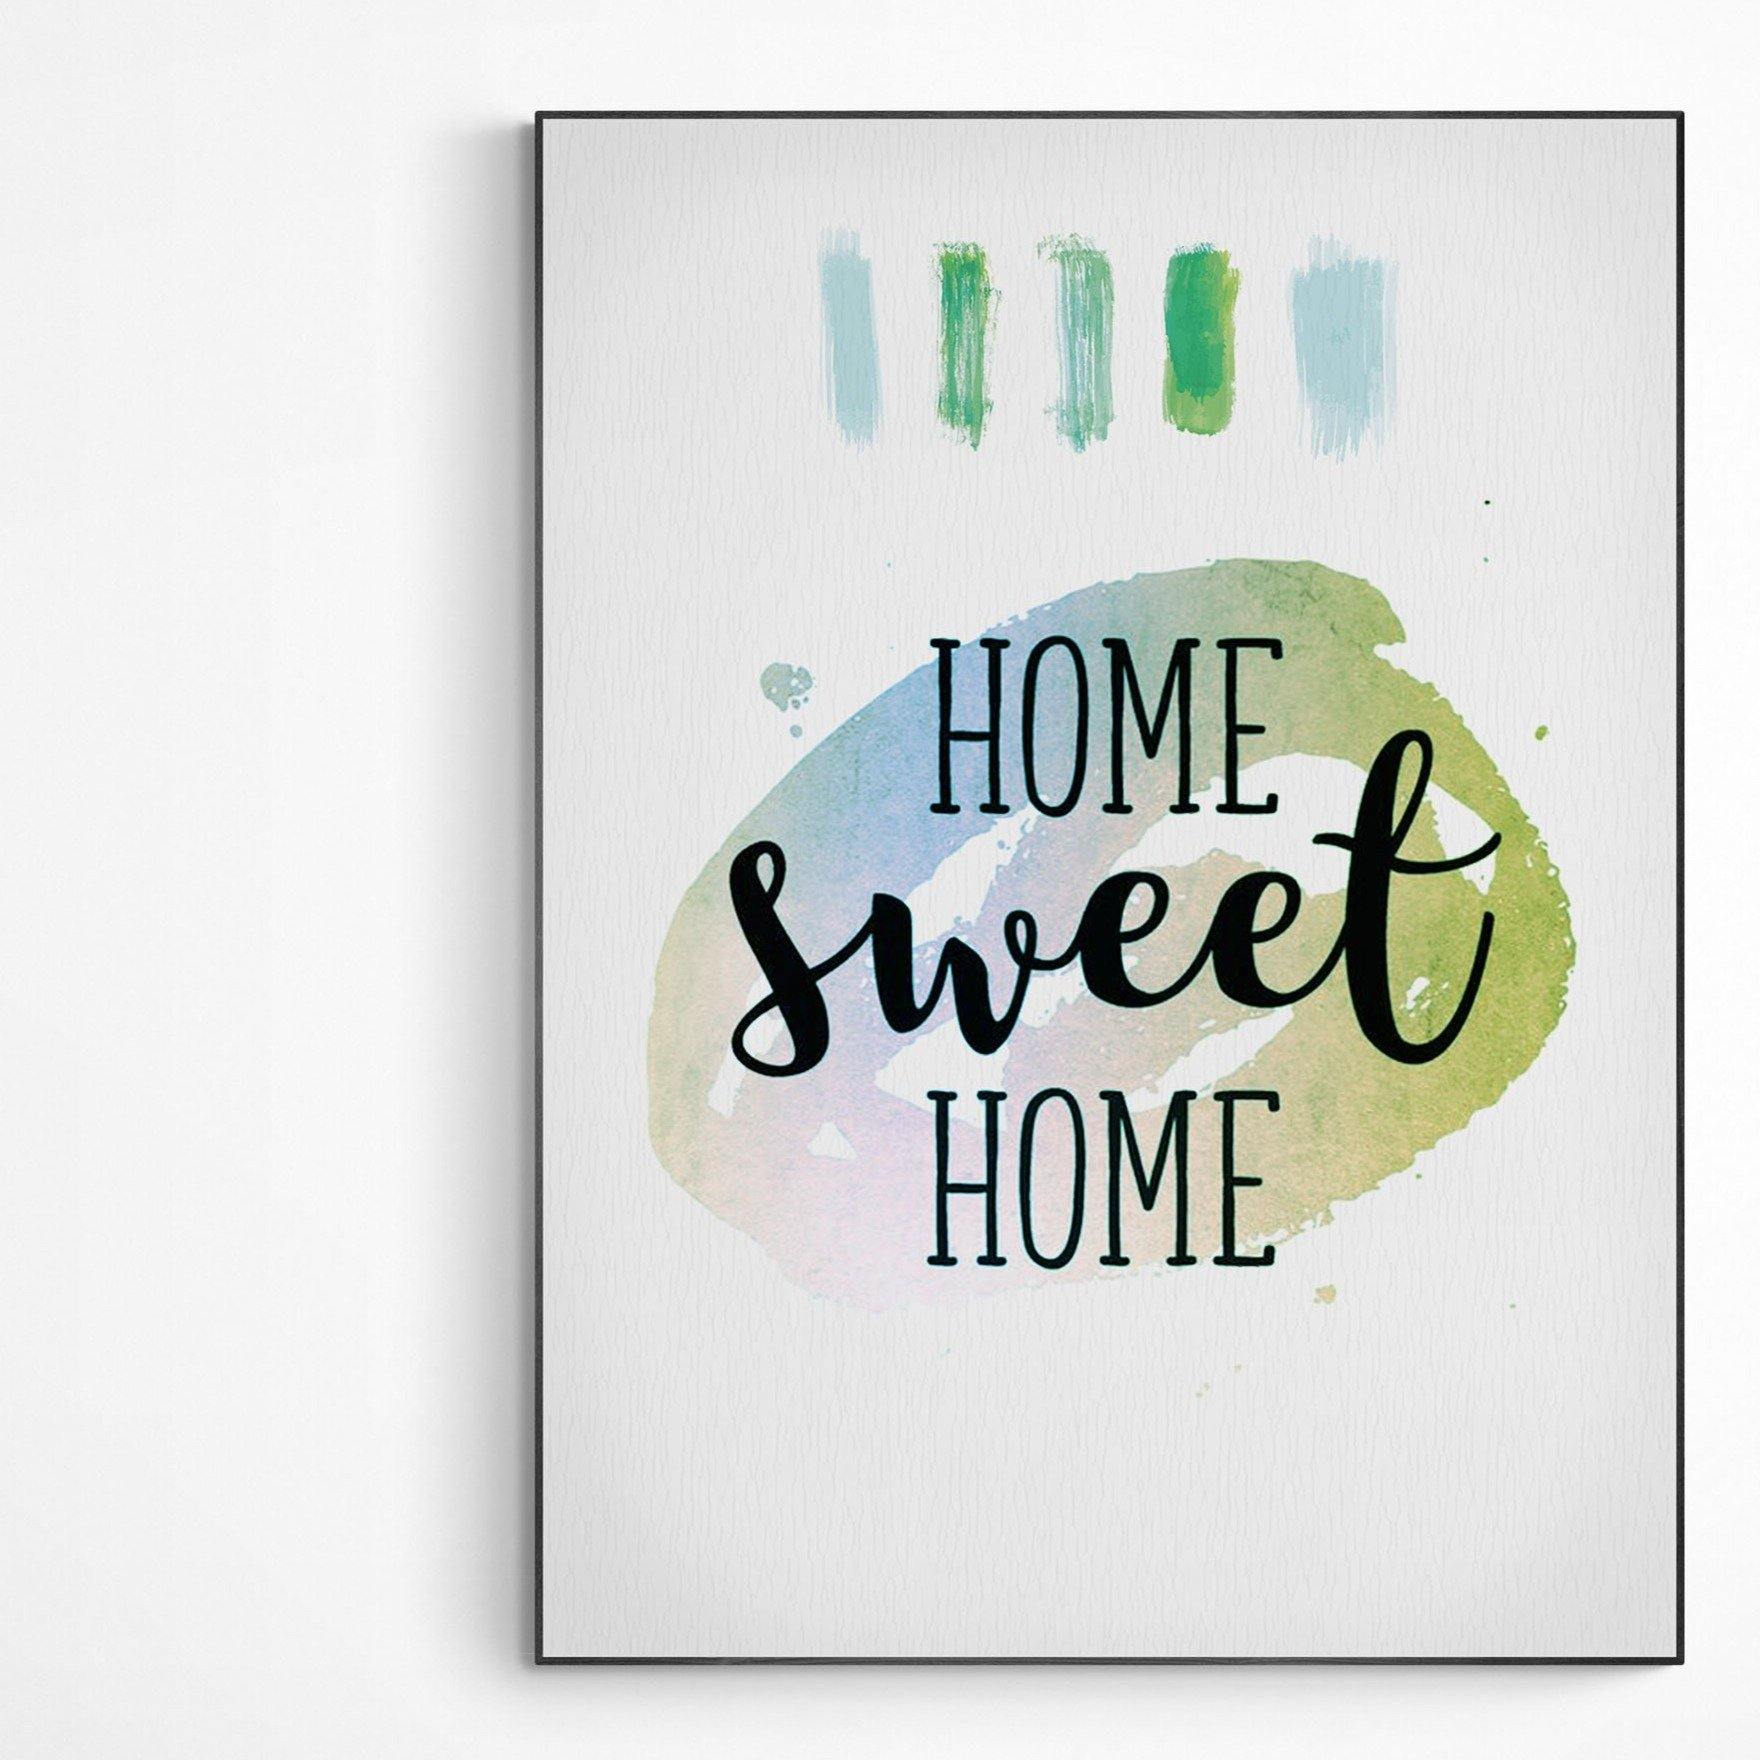 Home Sweet Home Poster | Original Print Art | Motivational Poster Wall Art Decor | Greeting Card Gifts | Variety Sizes